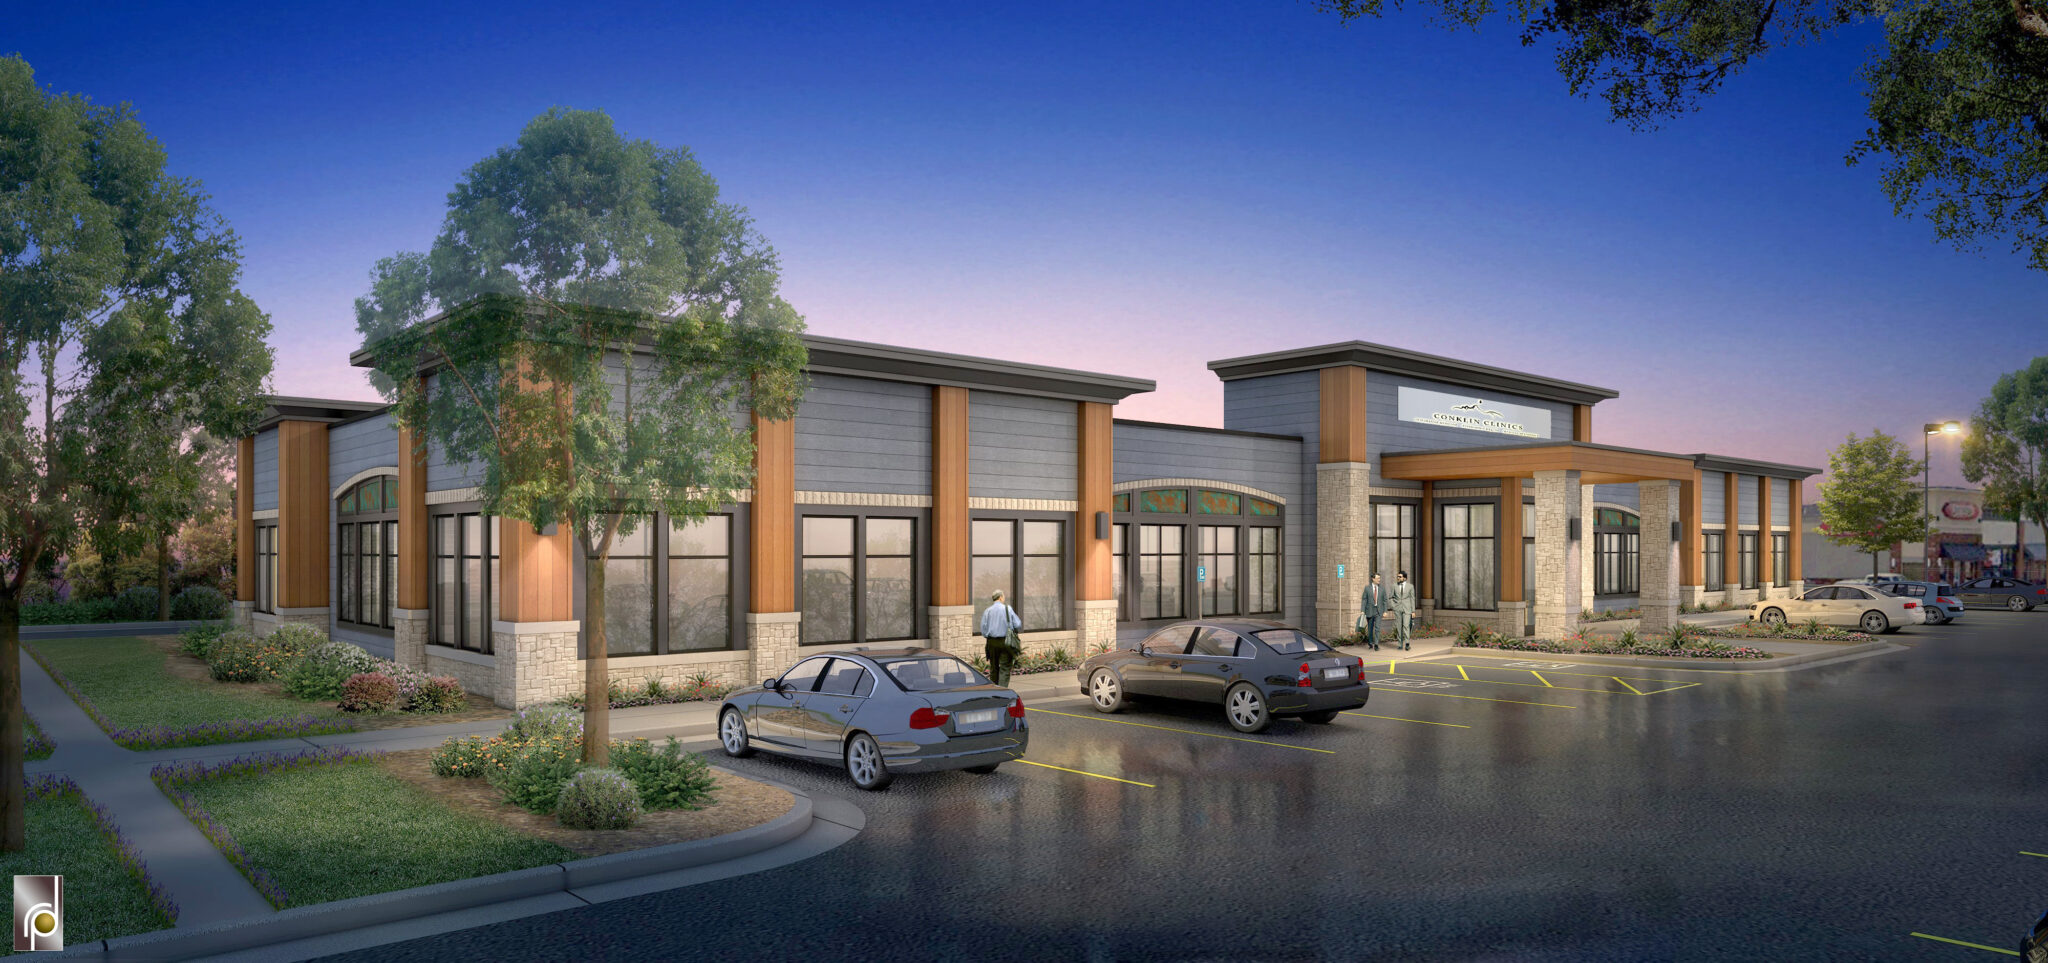 Conklin Clinics Exterior Rendering Scaled